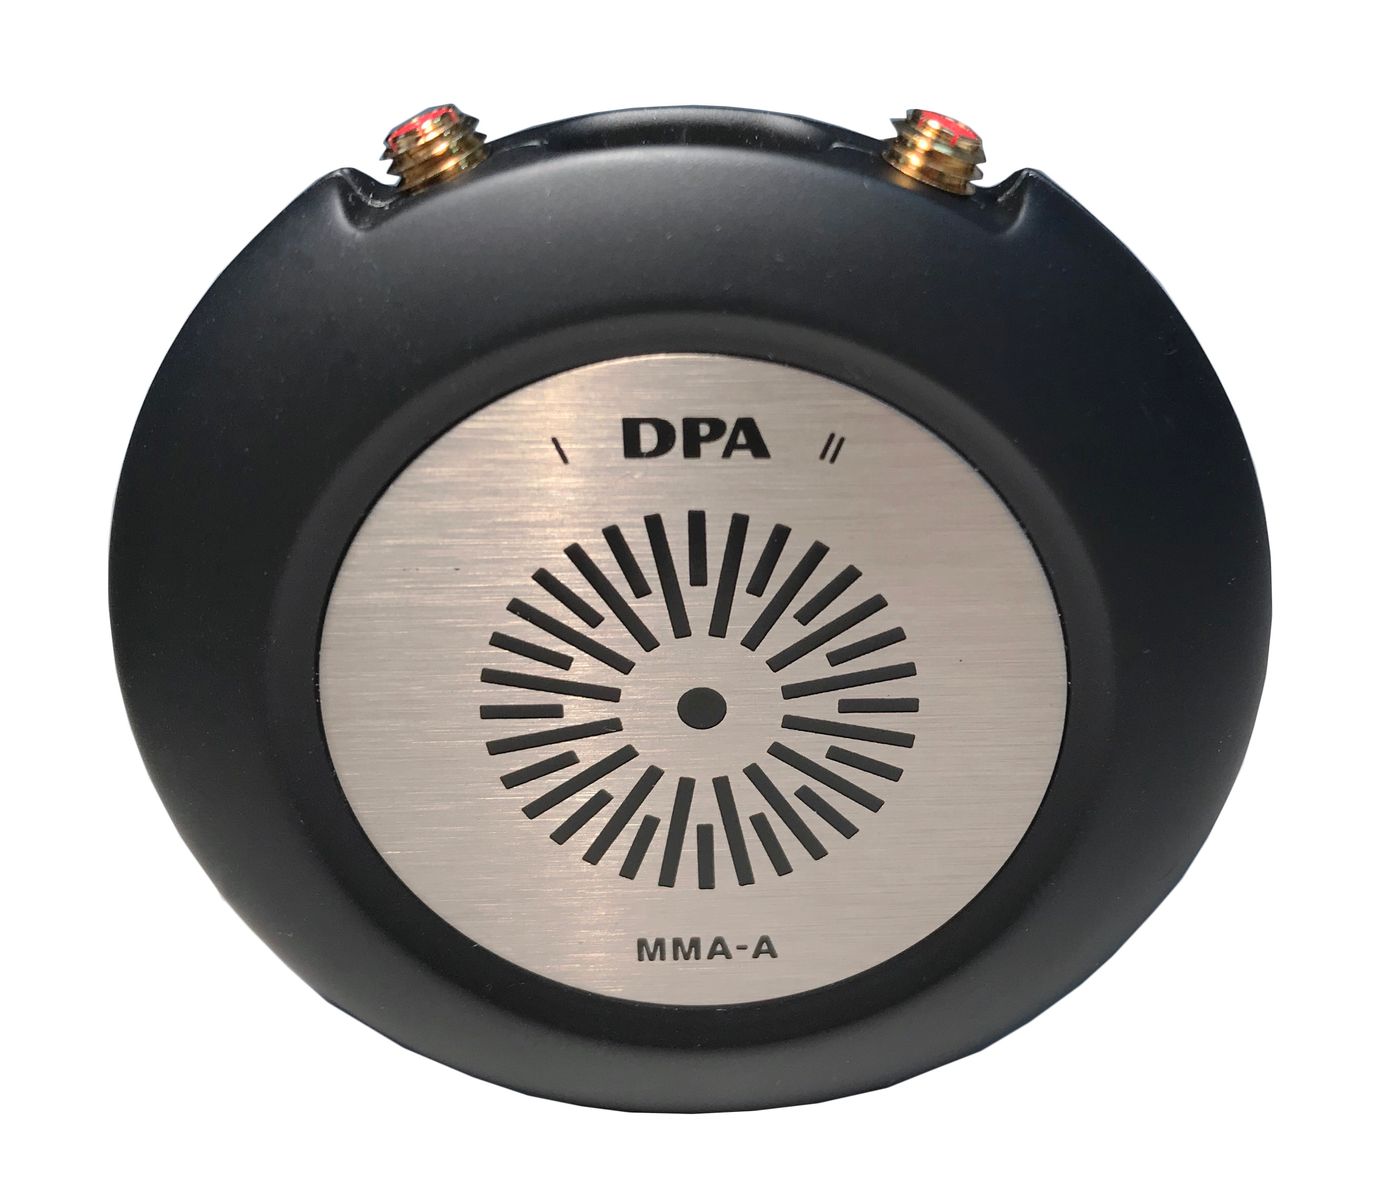 DPA MMA-A Digital Audio Interface is available at Hollywood Sound Systems.